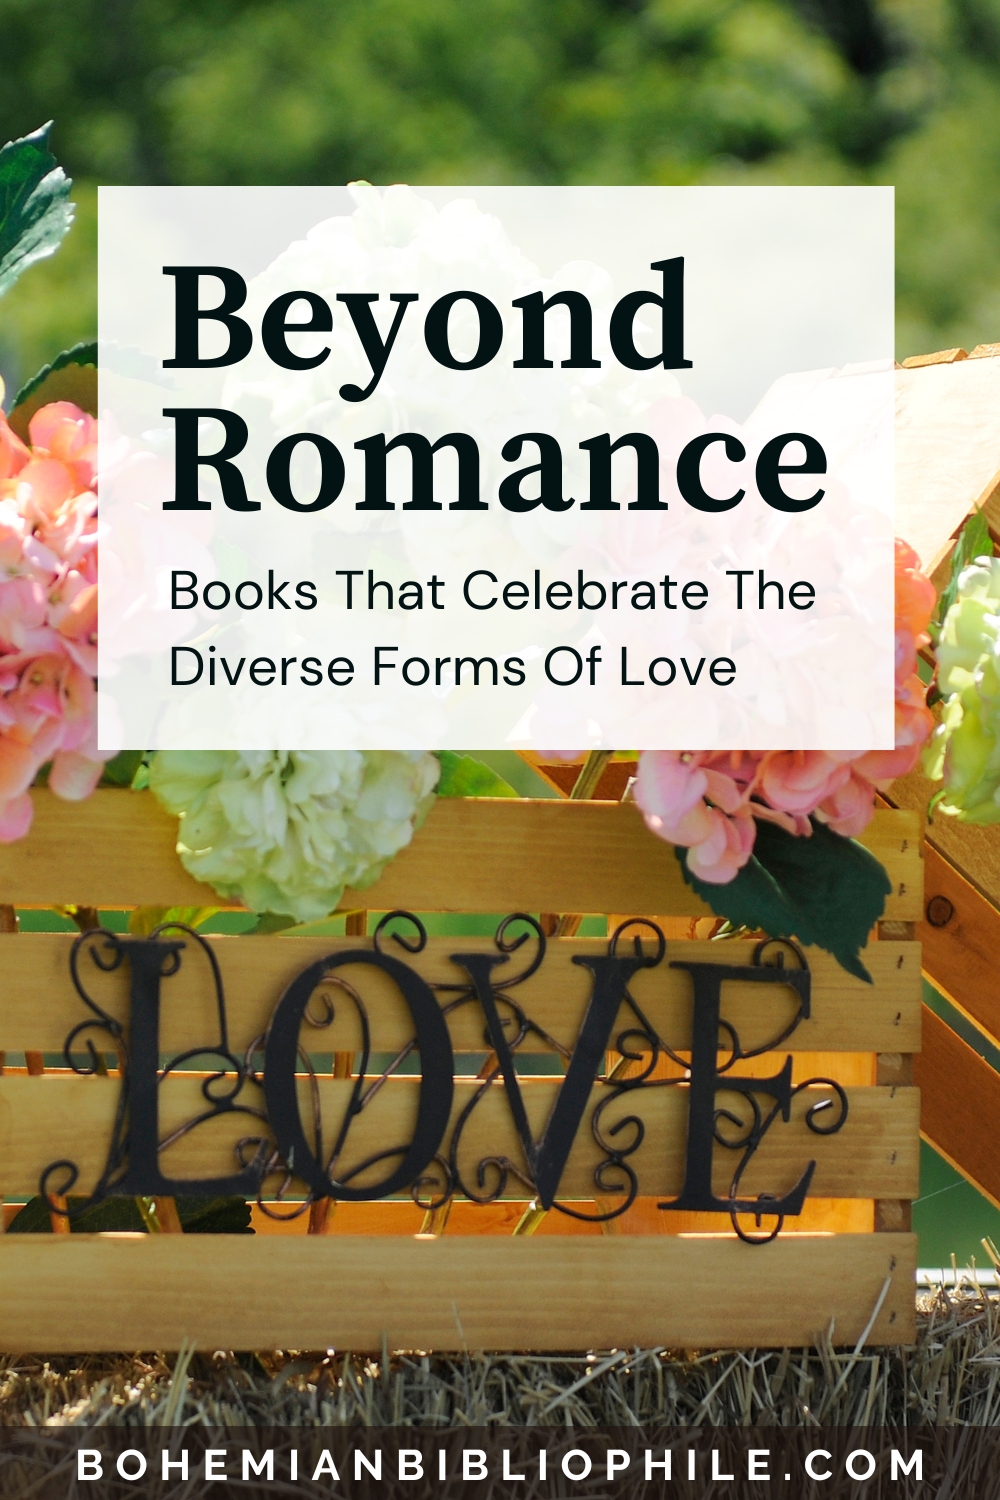 Beyond Romance: Books That Celebrate The Diverse Forms Of Love